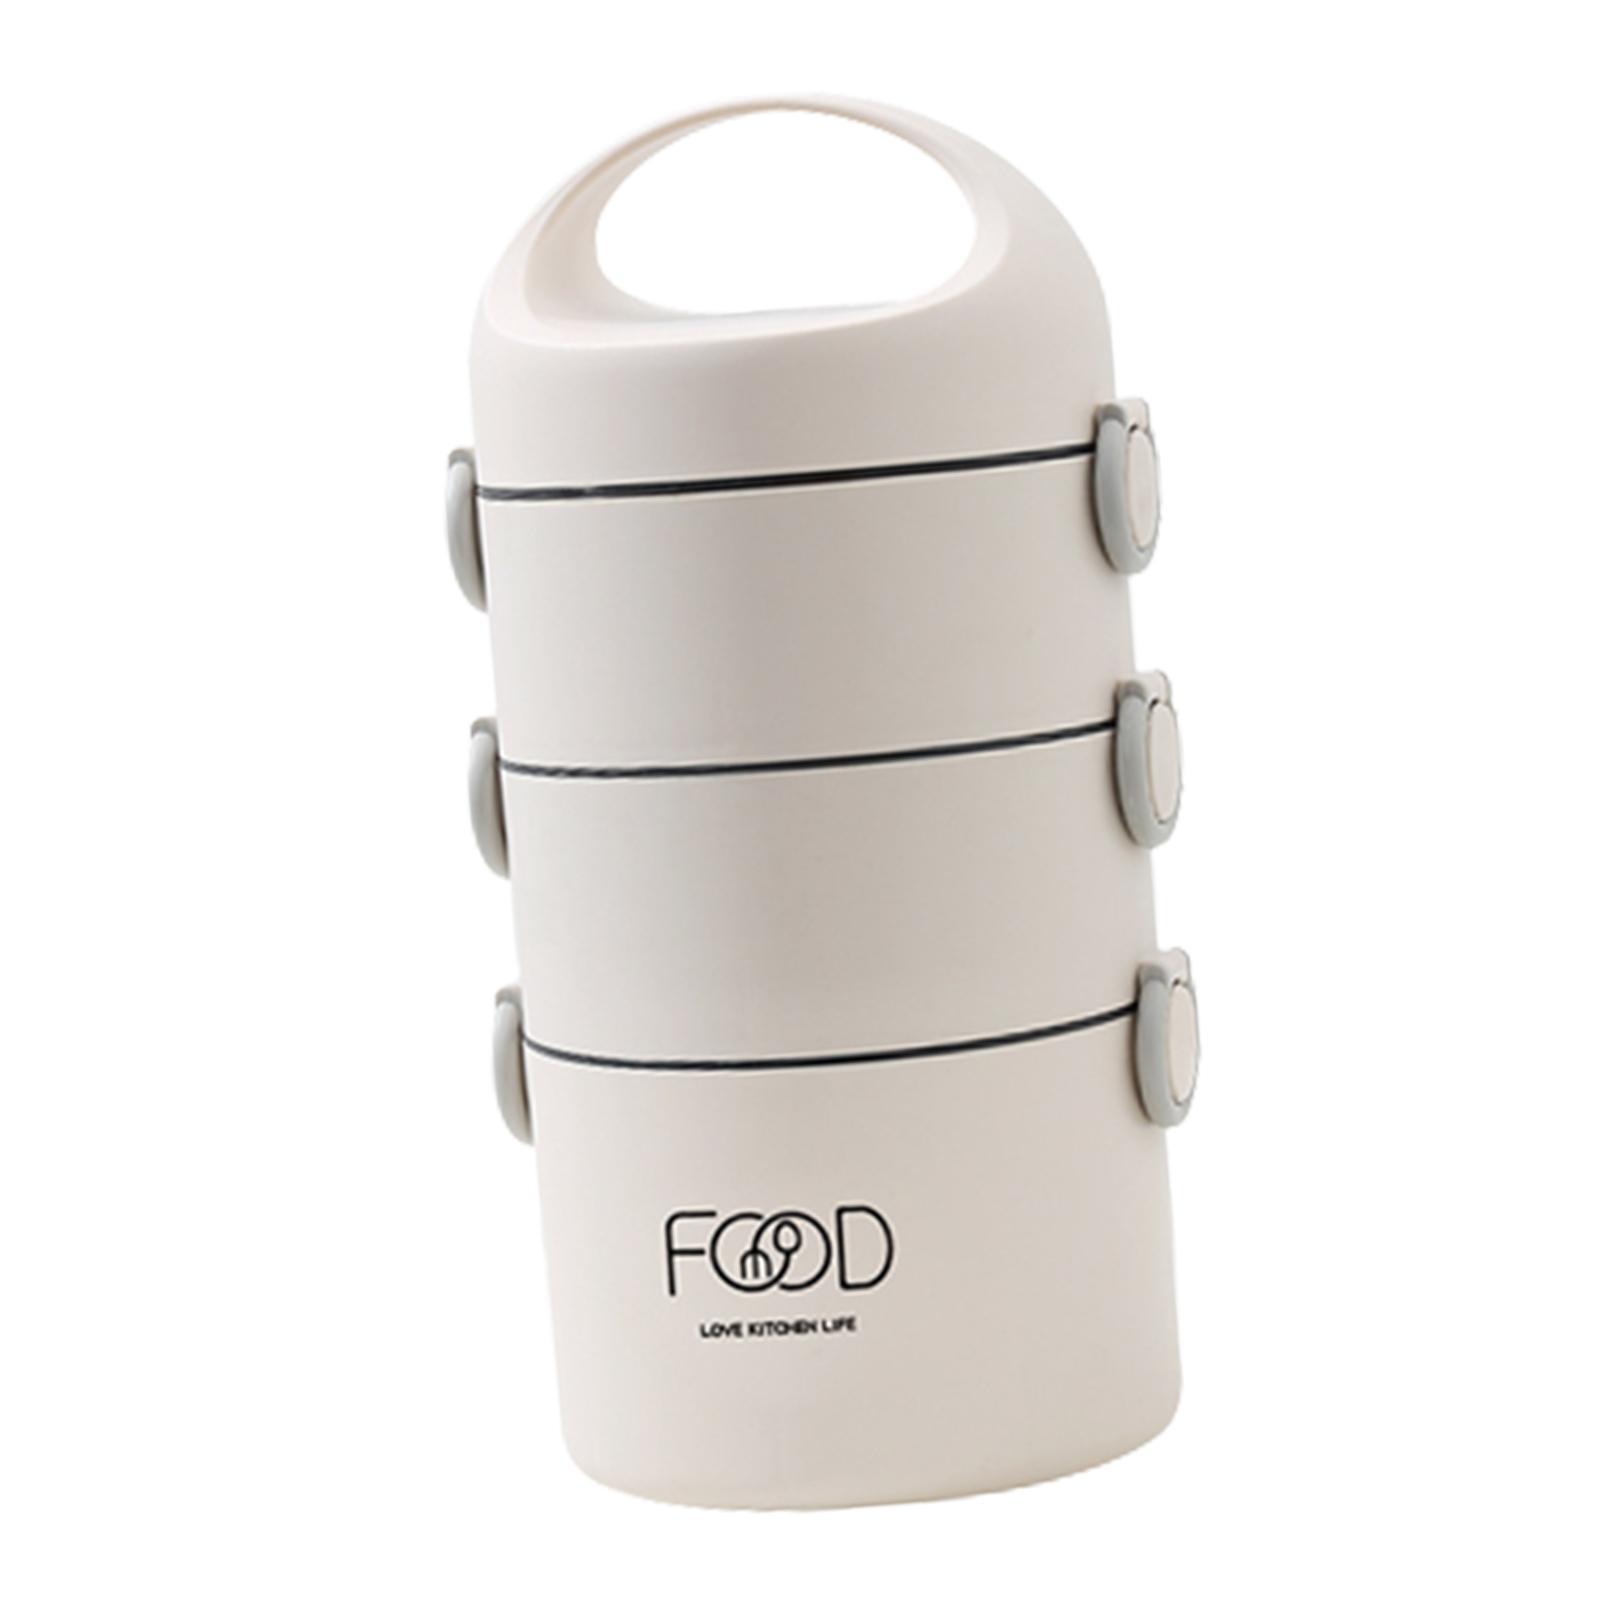 Stackable Lunch Box Airtight Lid Thermal Insulated Food Lunch Container for Hiking Picnic Outdoor